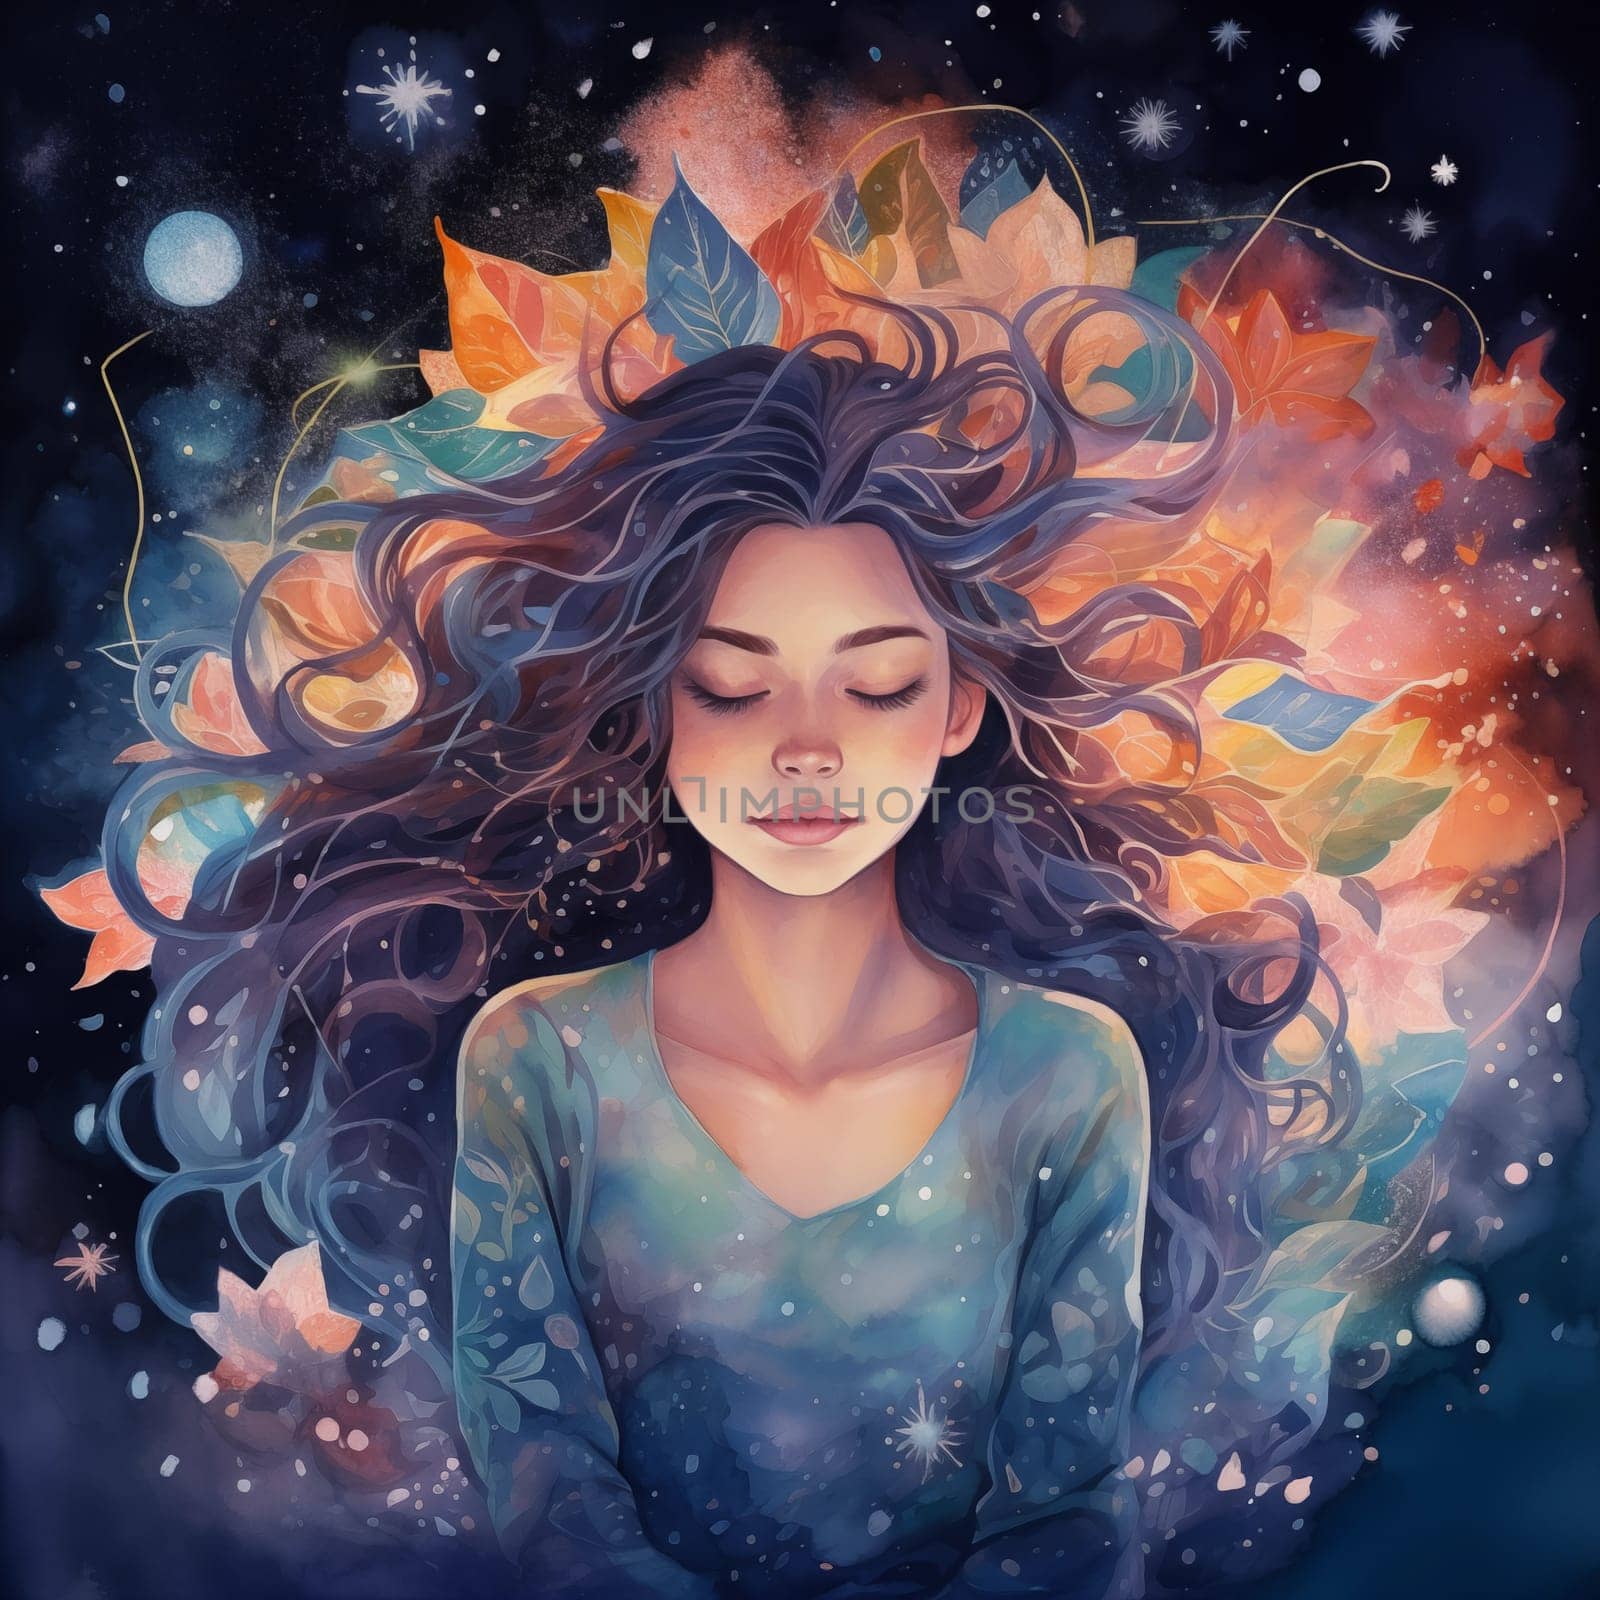 Mystical artwork: a girl in meditation with closed eyes against a cosmic backdrop with nebulae. Intricate leaf and flower patterns surround her, evoking a dreamy atmosphere in this illustrated scene. by veronawinner